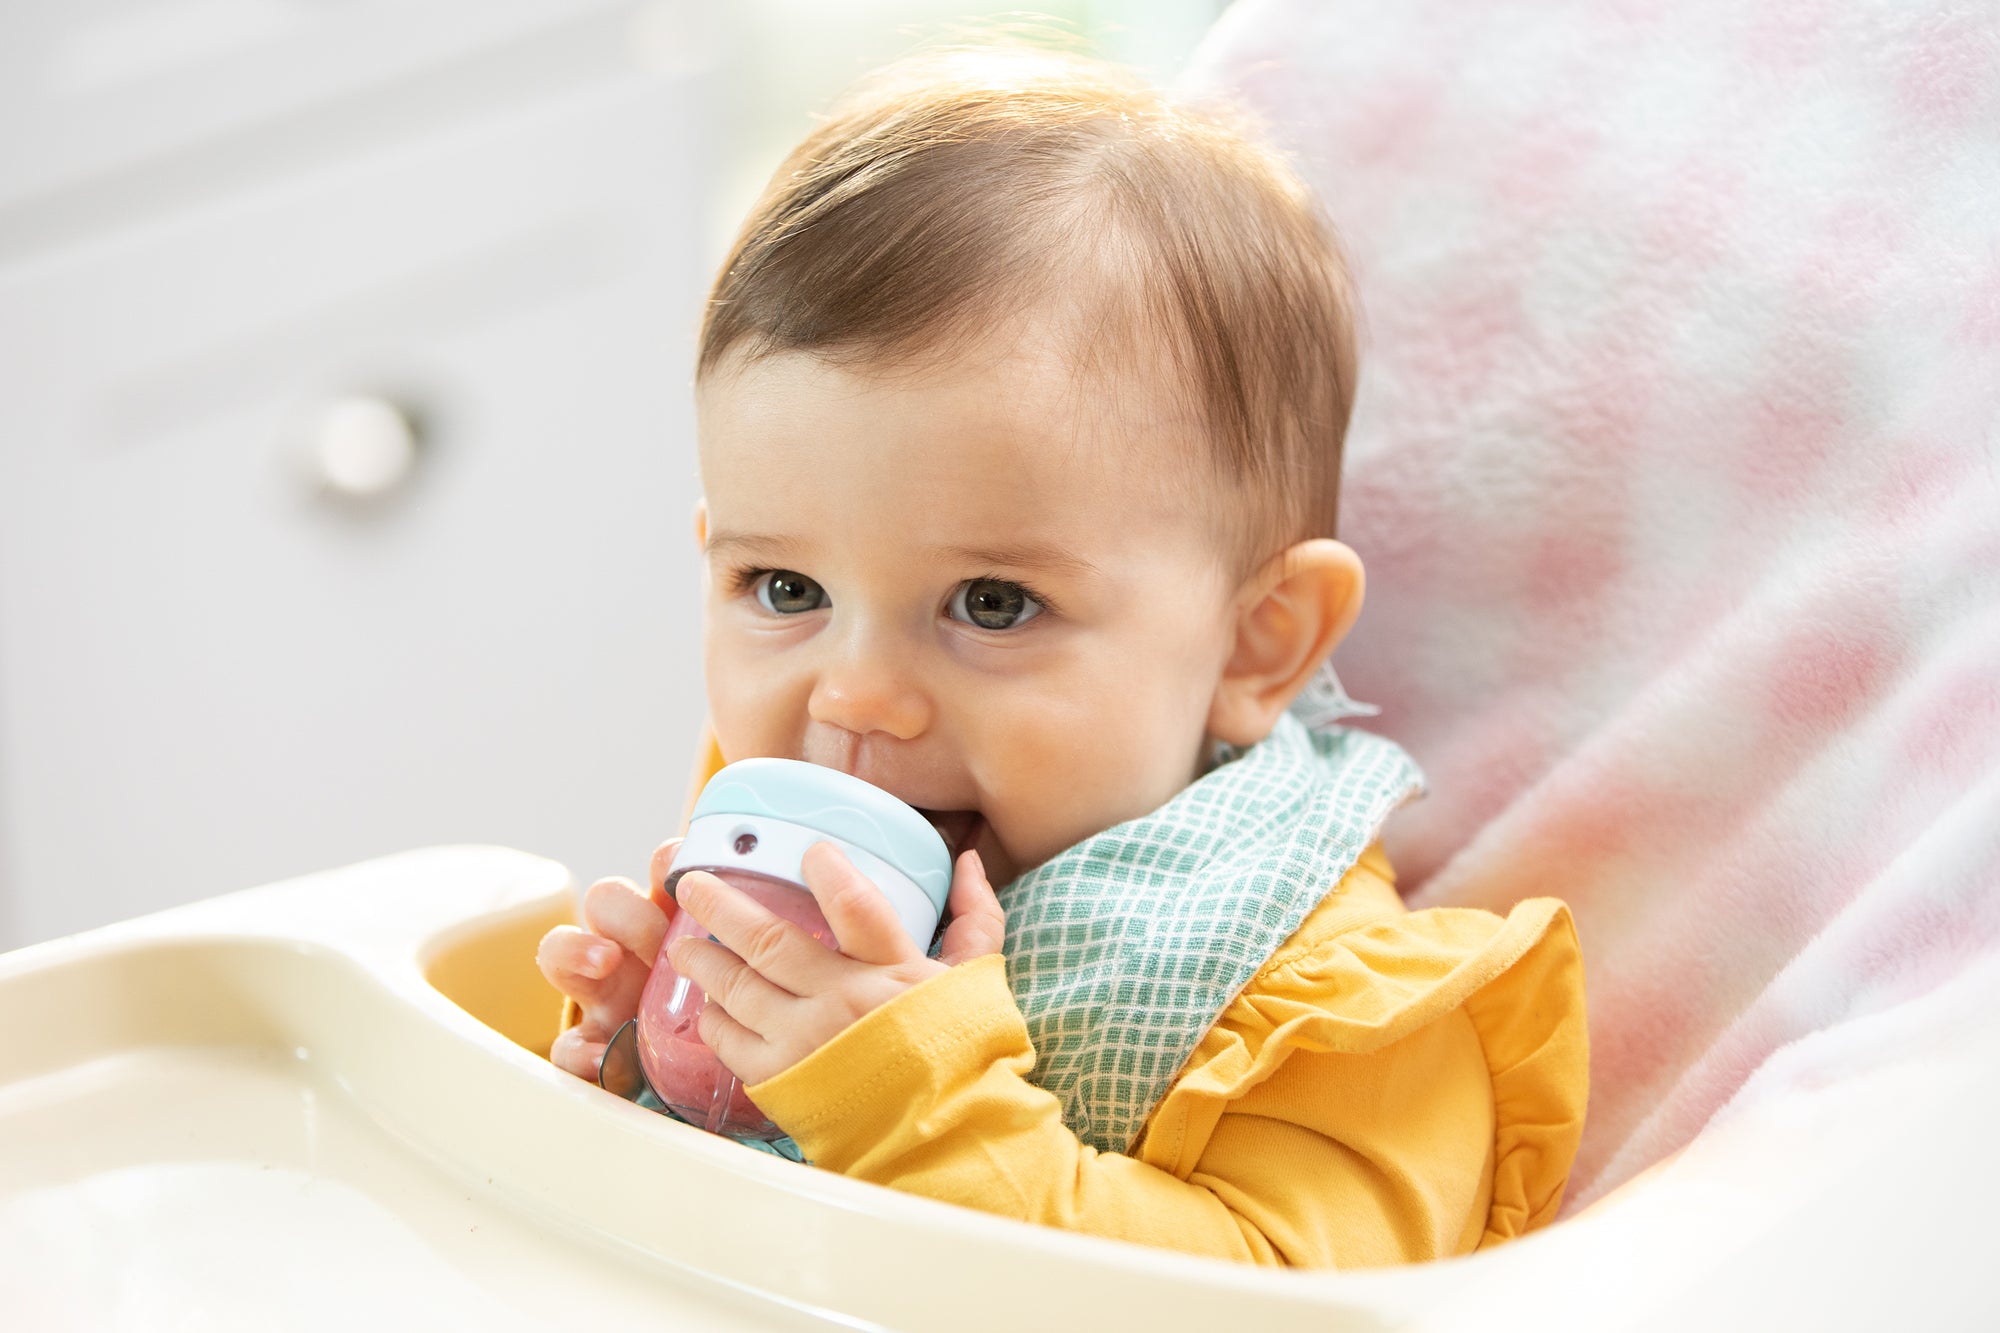 How to Know When Your Baby is Ready for Solids